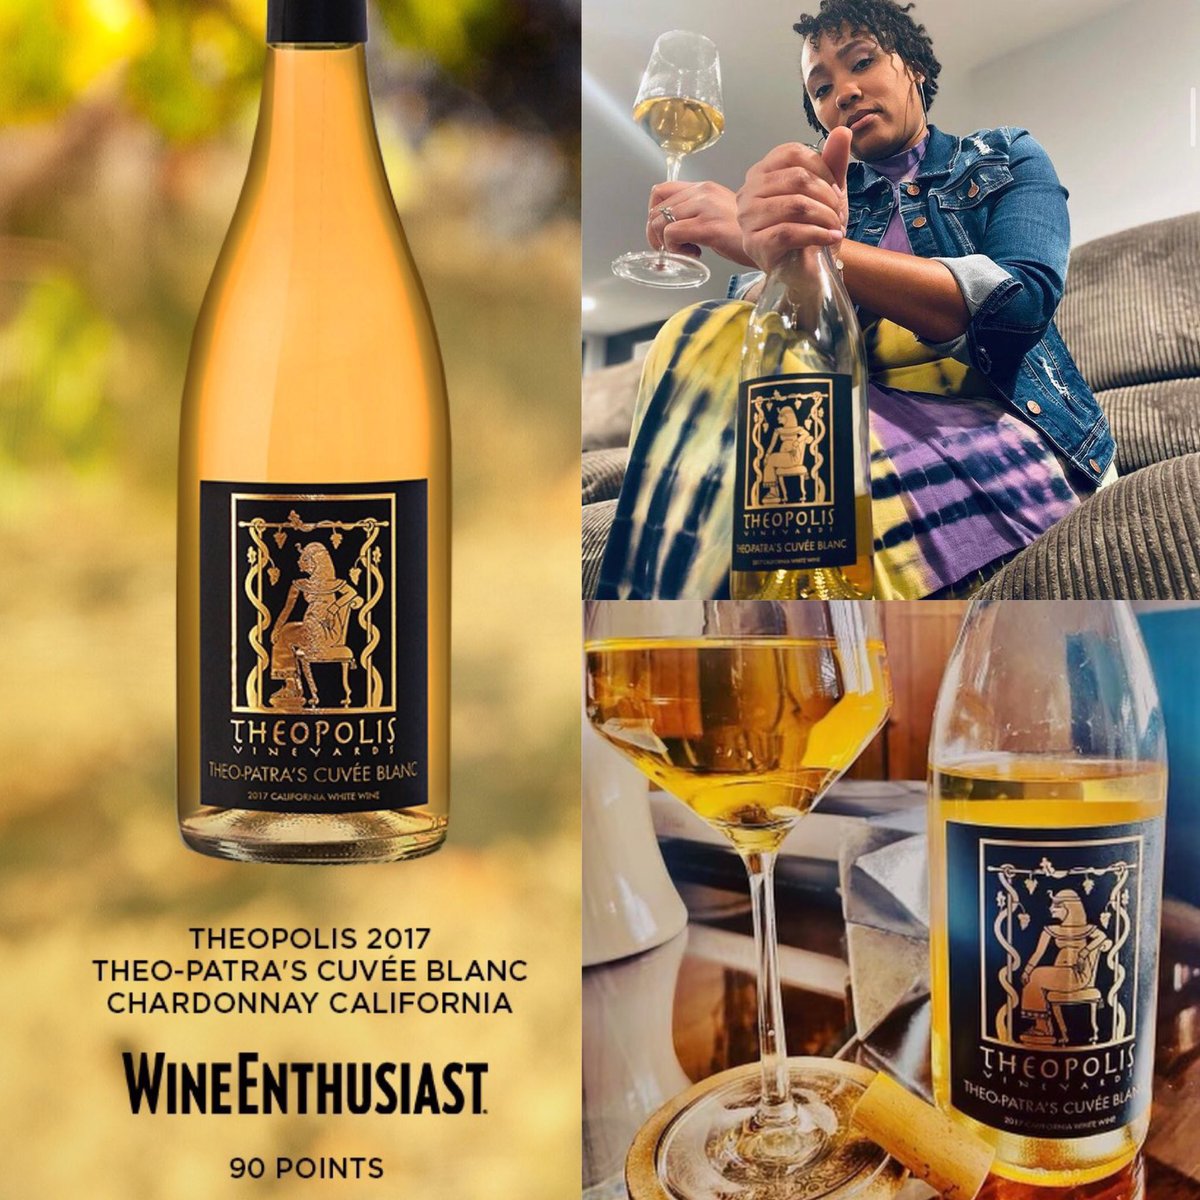 We celebrate International #ChardonnayDay with our 90 point Theo-Patra’s Cuvée Blanc. This golden colored chardonnay has luscious notes of honeydew melon, apricot and peach. Available on our website, please click link in bio to order yours today. 

#internationalchardonnayday